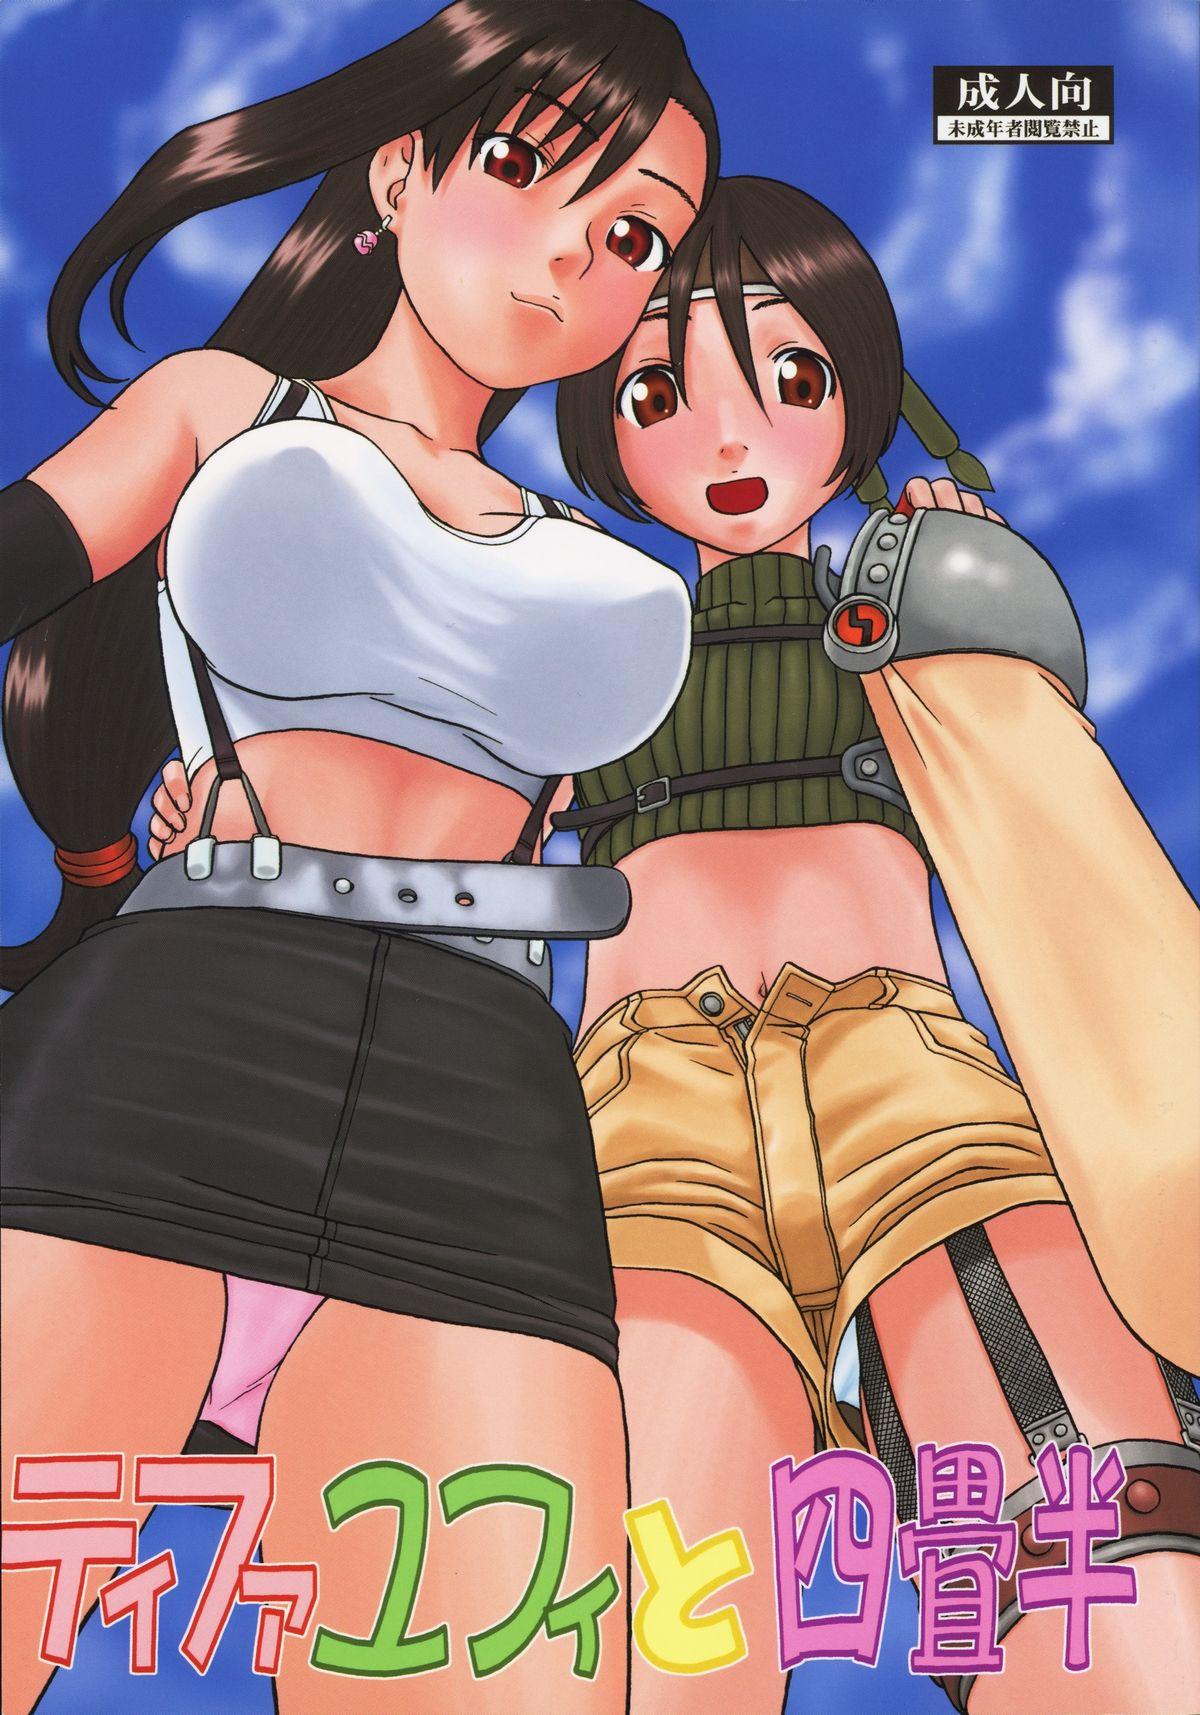 Tifa to Yuffie to Yojouhan 0